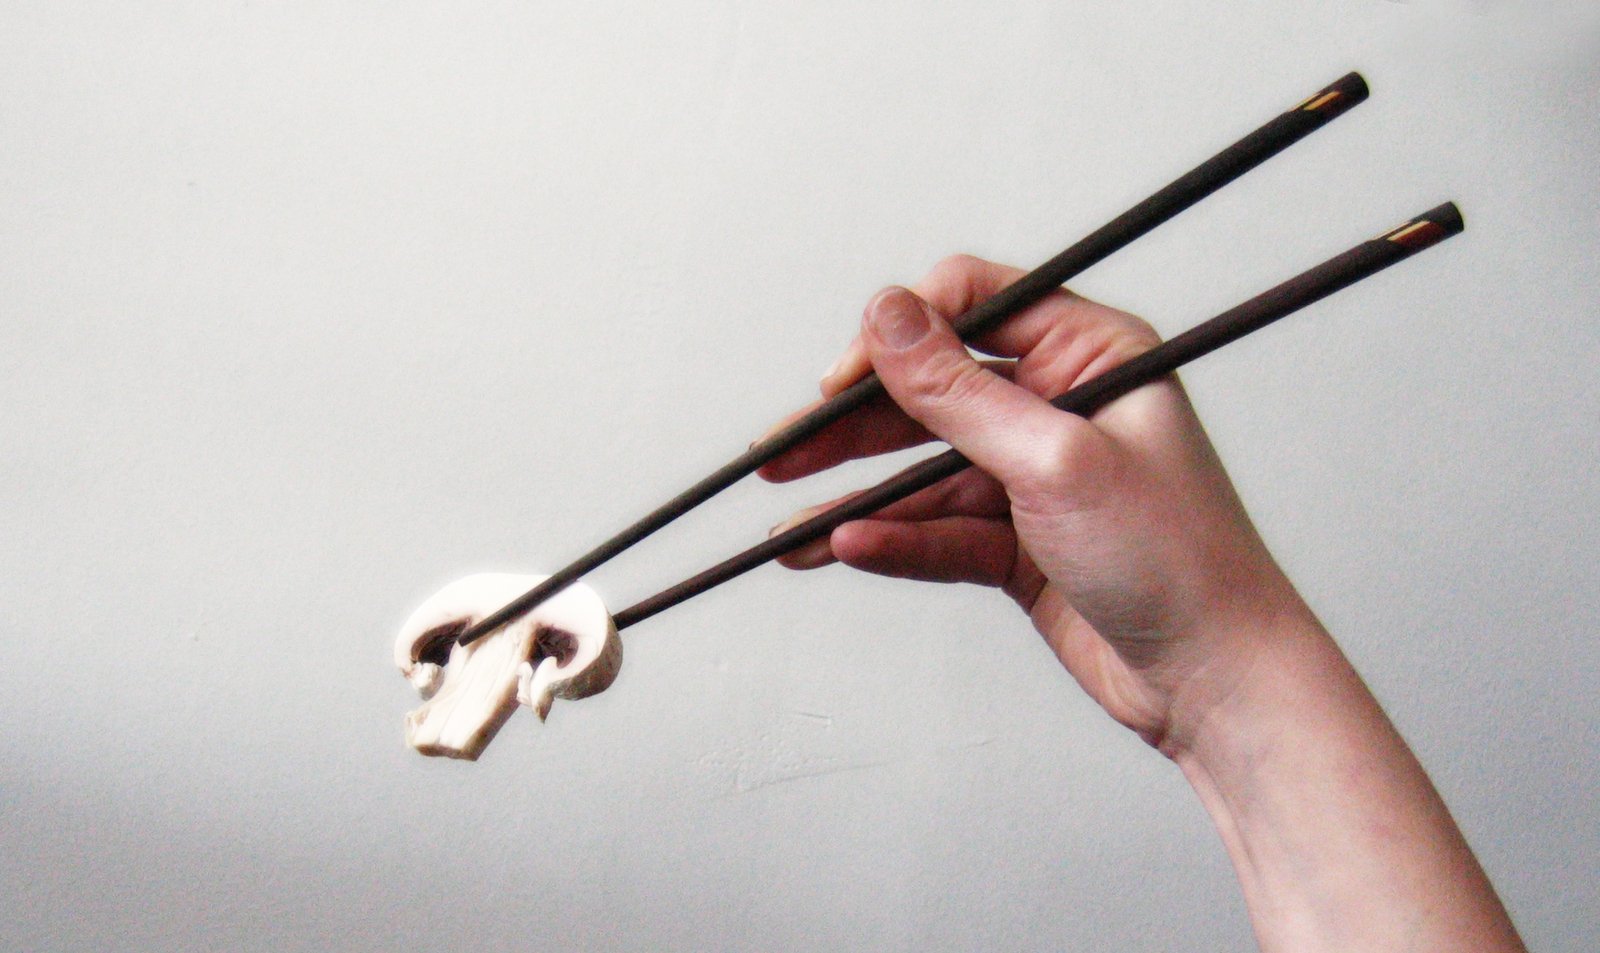 two sticks being pulled up by someone holding an object